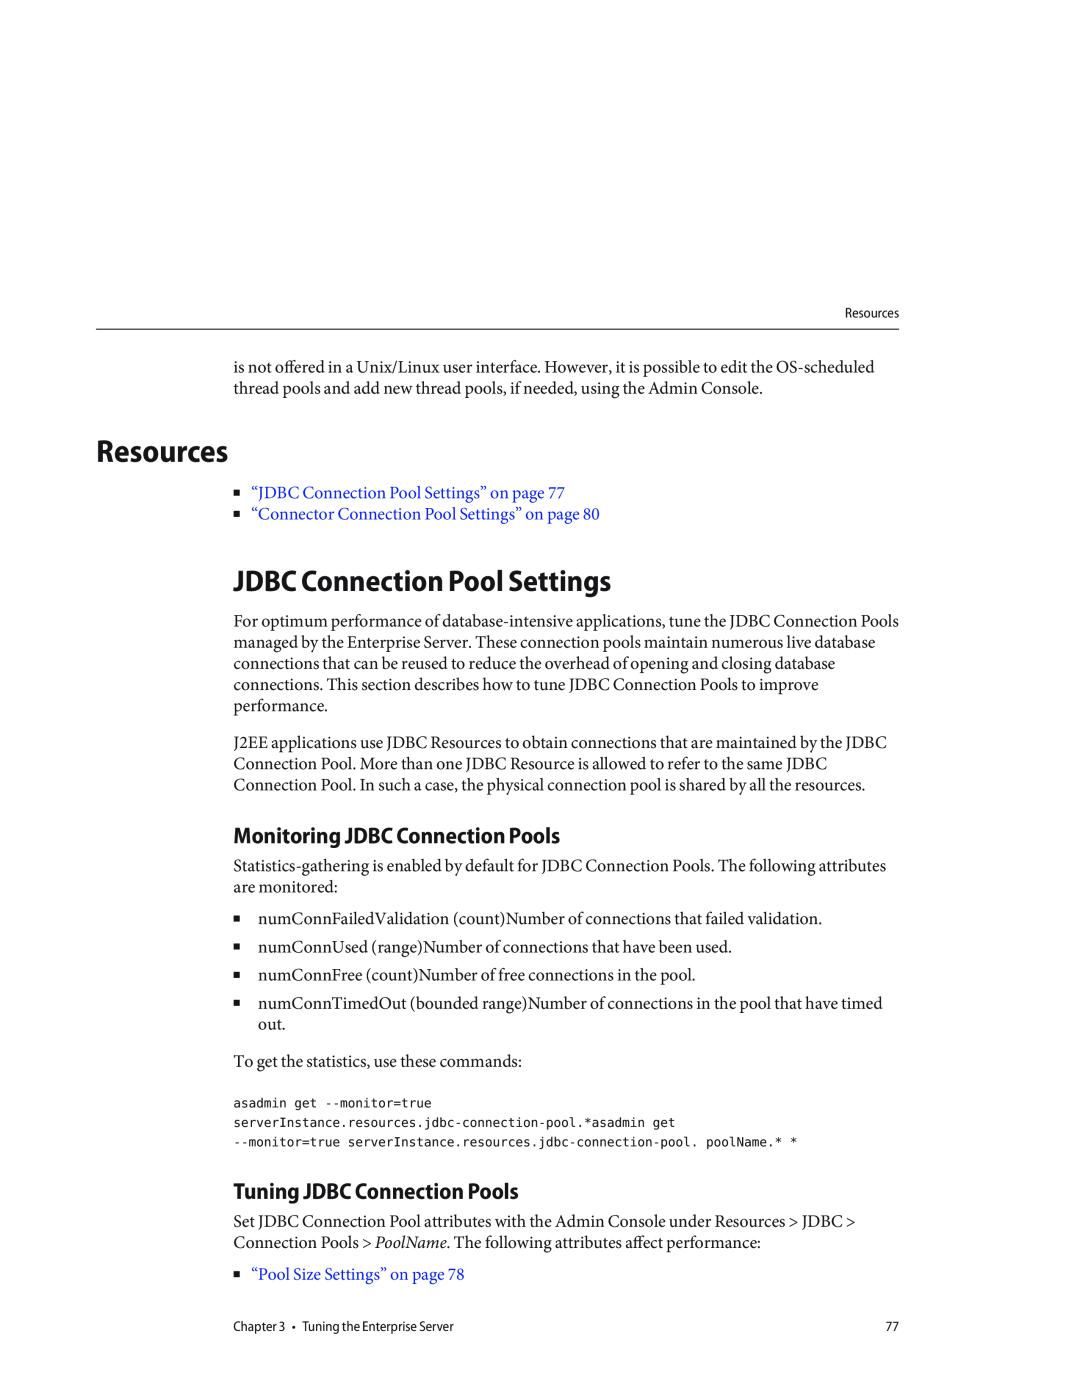 Sun Microsystems 820434310 manual Resources, JDBC Connection Pool Settings, Monitoring JDBC Connection Pools 